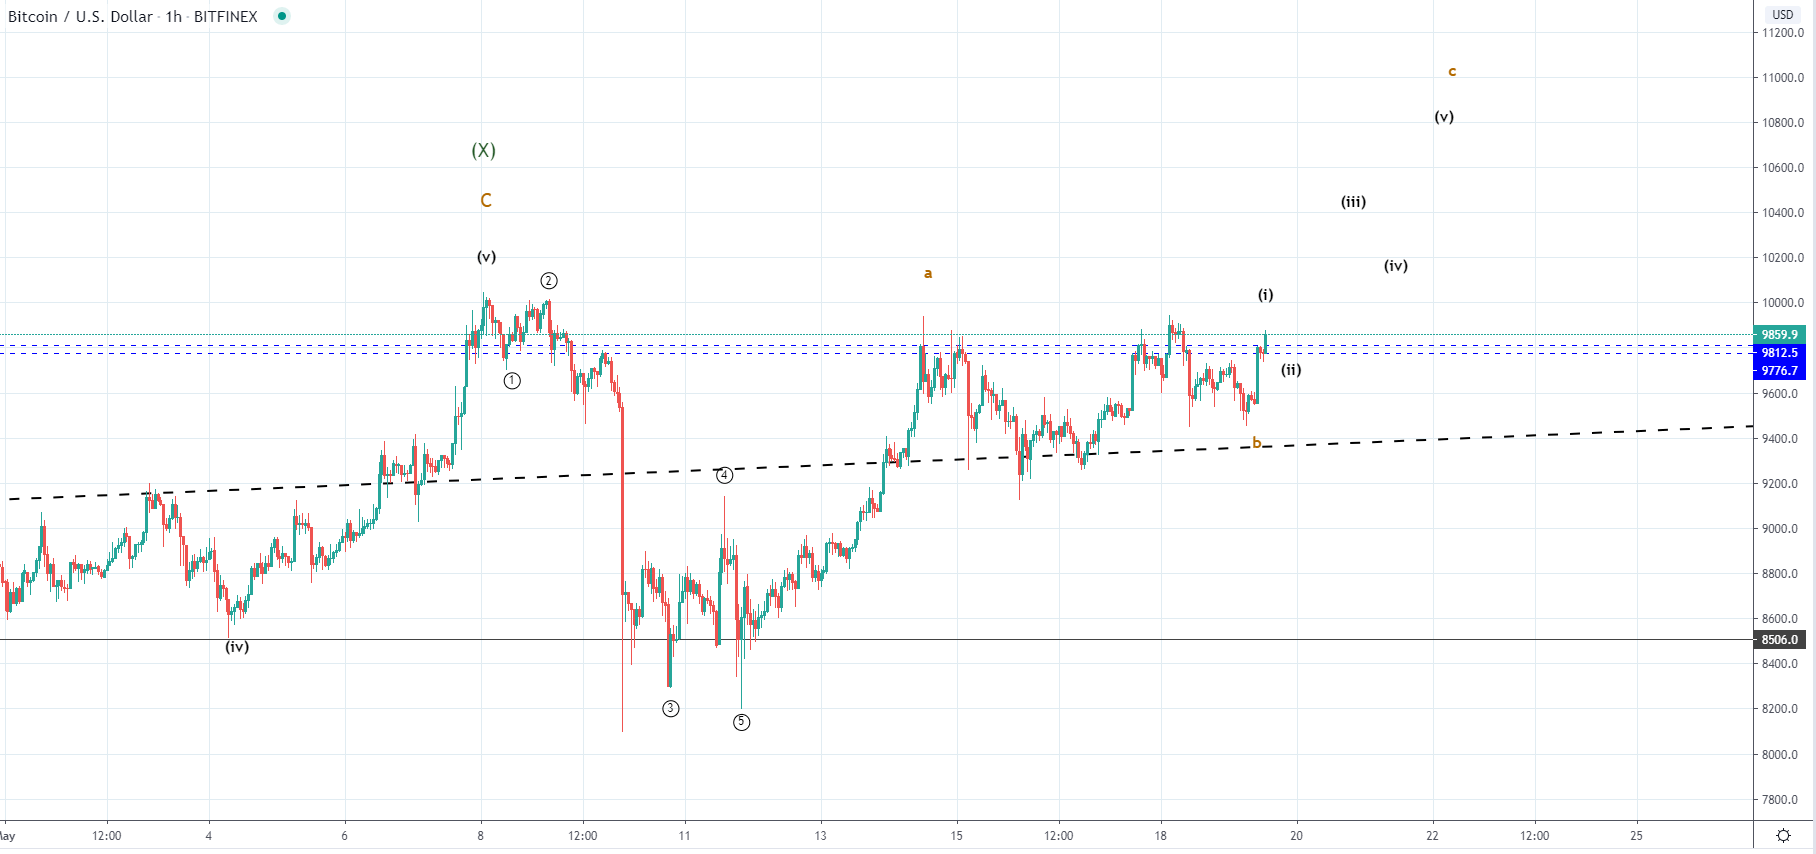 BTC and XRP - Further increase expected